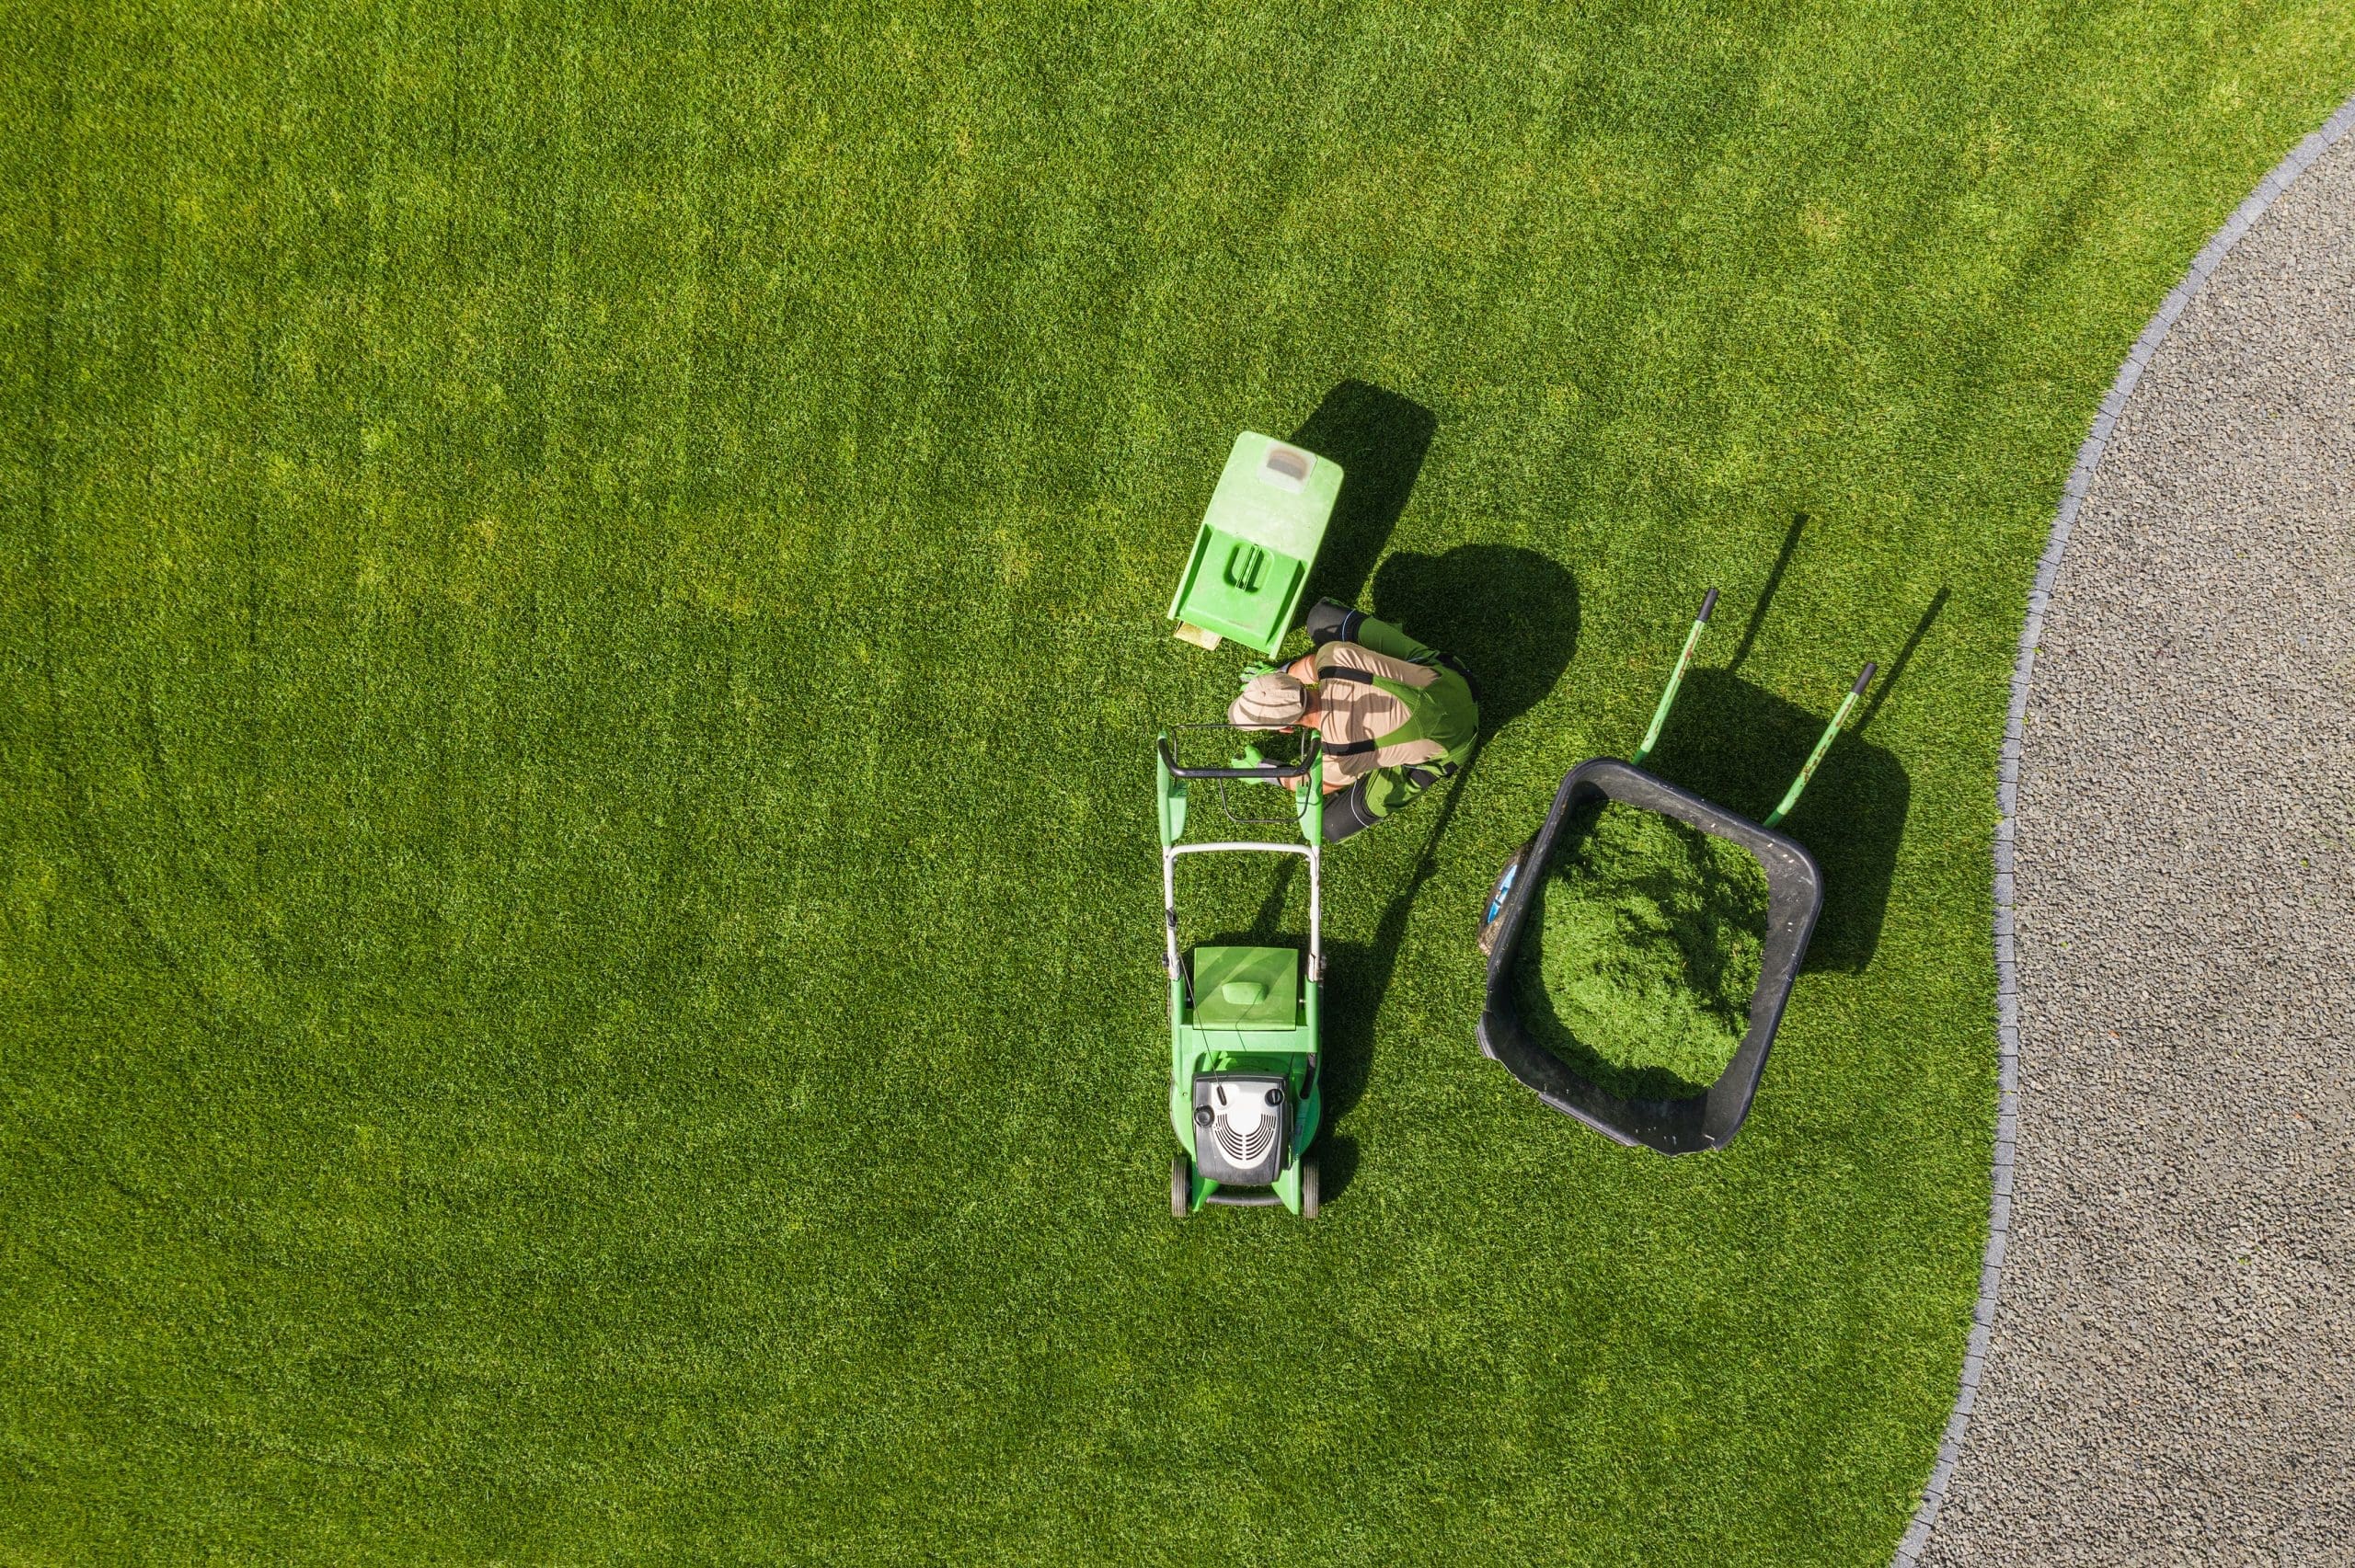 Aerial View of Backyard Garden in Johnston, RI, Lawn Mowing and Weekly Maintenance. Caucasian Gardener in His 40s with Modern Mower Removing Trimmed Grass From the Field.